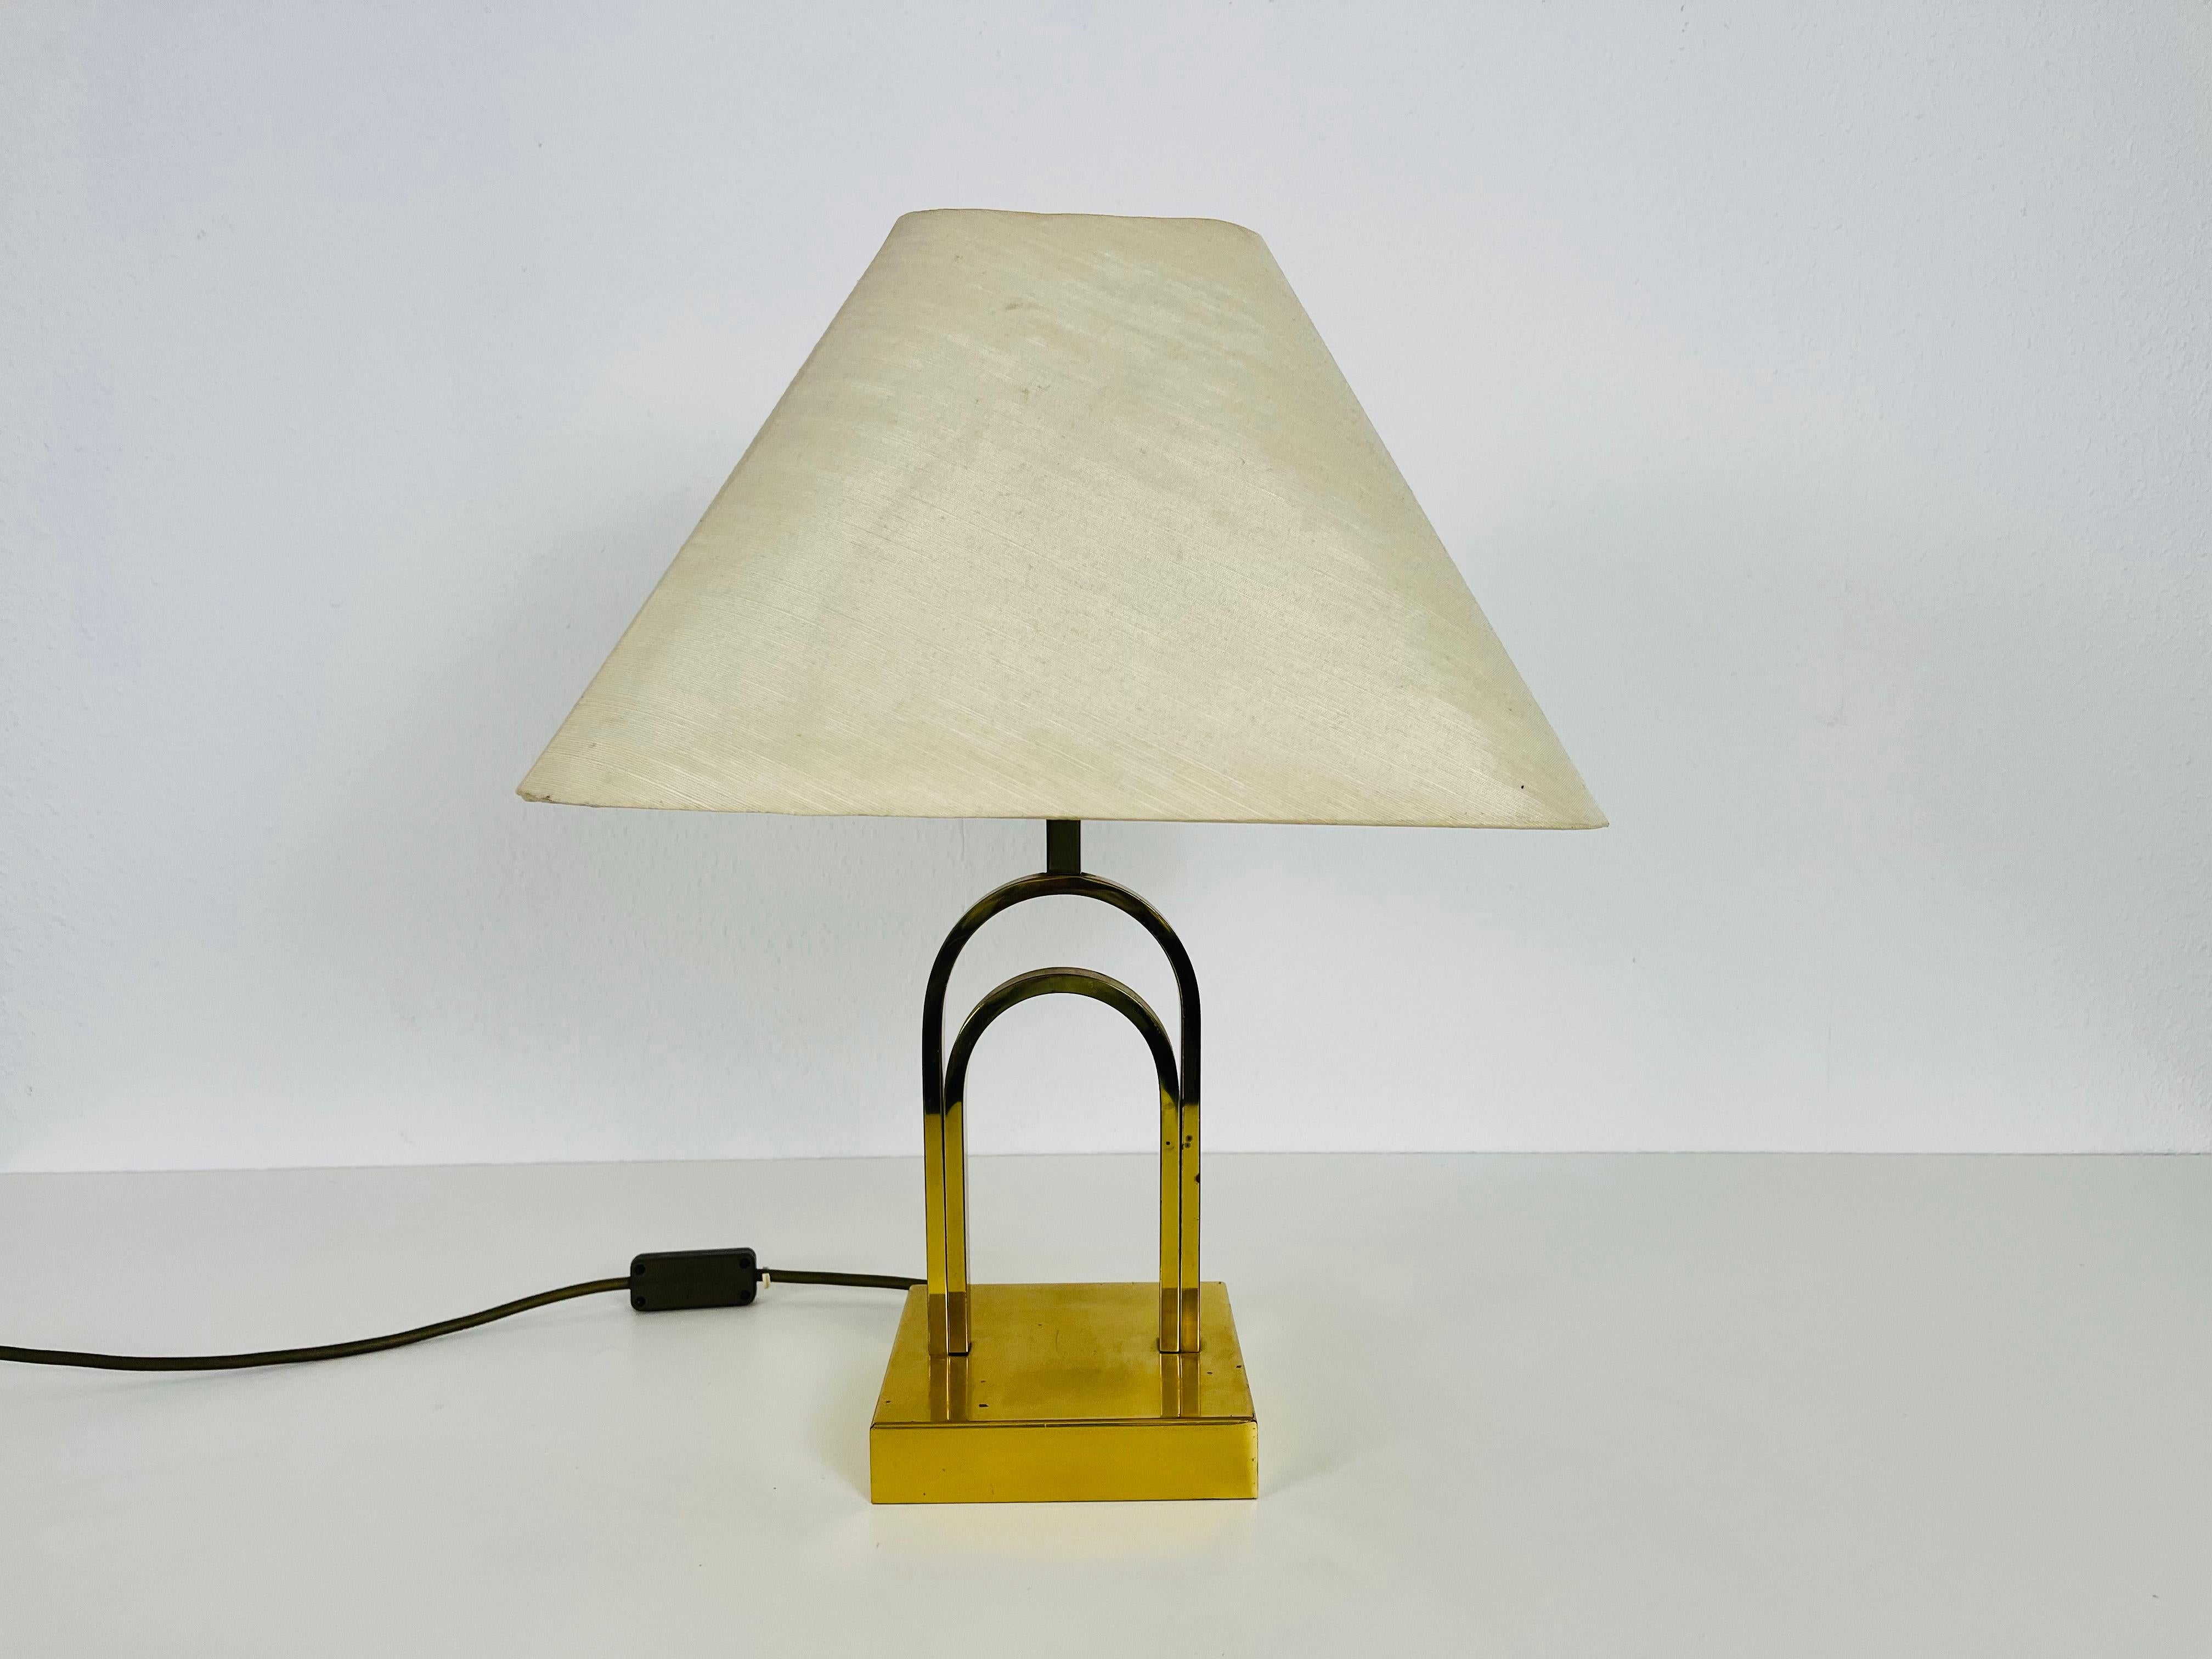 A beautiful large table lamp made in the 1960s. The base is made of solid brass. The lamp shade is made of fabric and has a beige color.

The light requires one E27 light bulb. Works with both 120/220 V. Good vintage condition.

Free worldwide